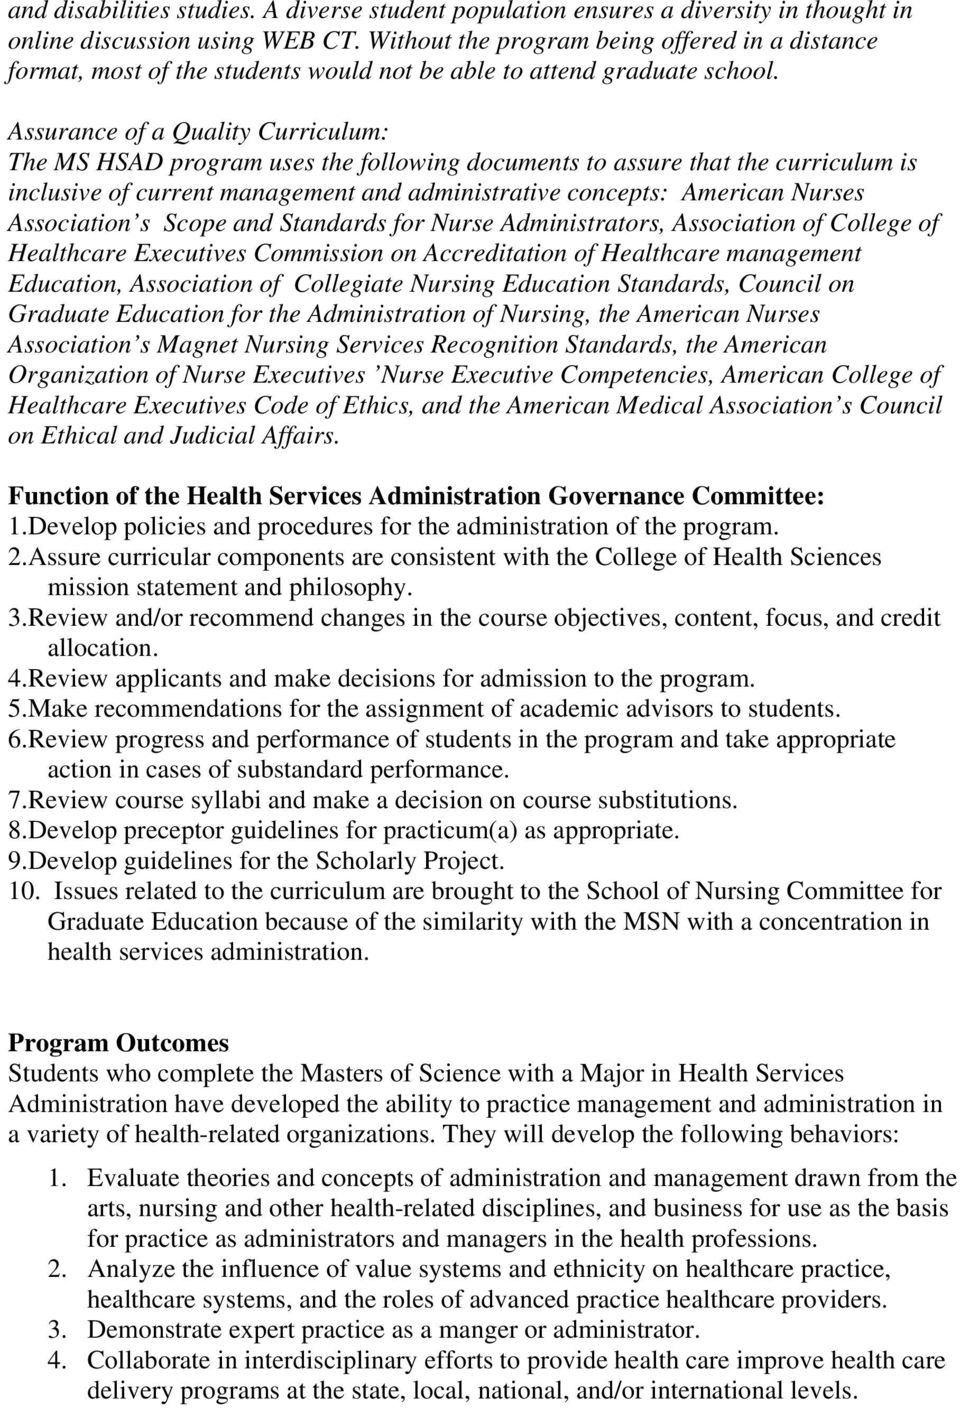 Assurance of a Quality Curriculum: The MS HSAD program uses the following documents to assure that the curriculum is inclusive of current management and administrative concepts: American Nurses